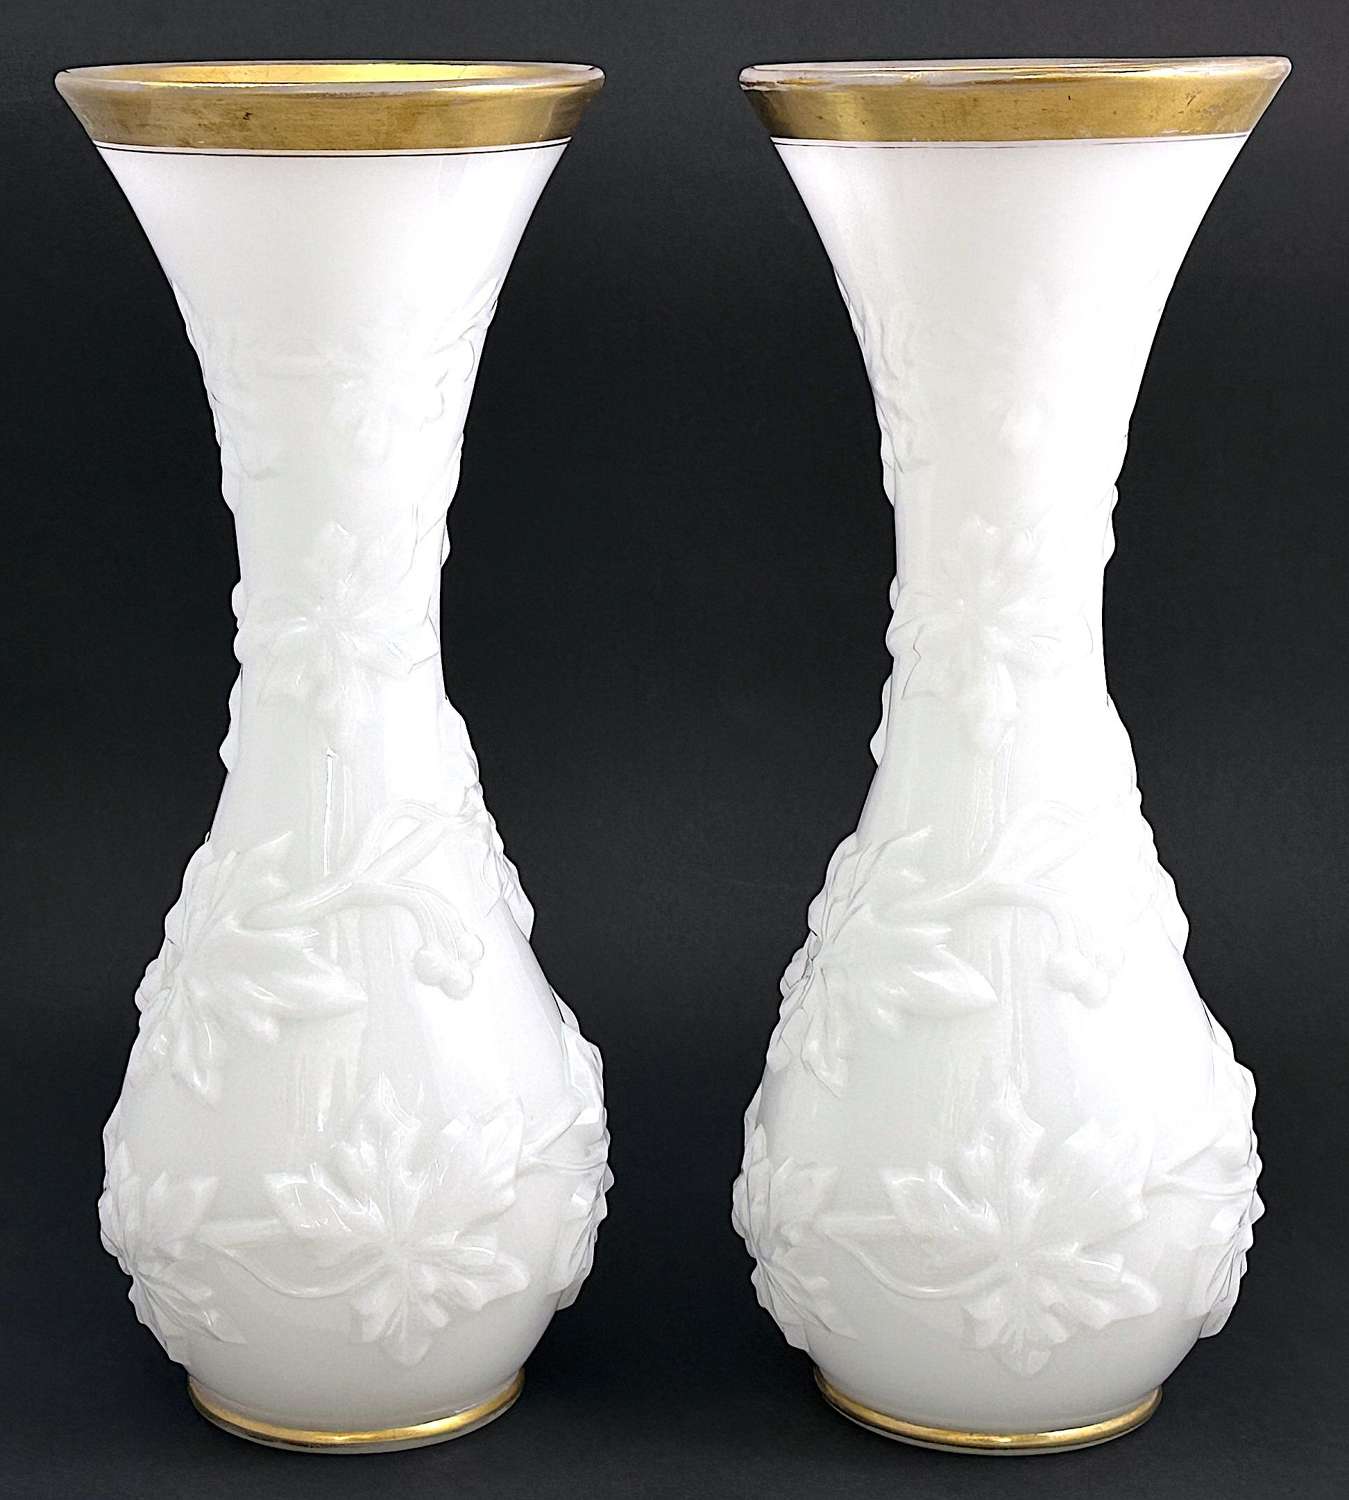 Pair of Very Large Antique BACCARAT White Opaline Glass Vases